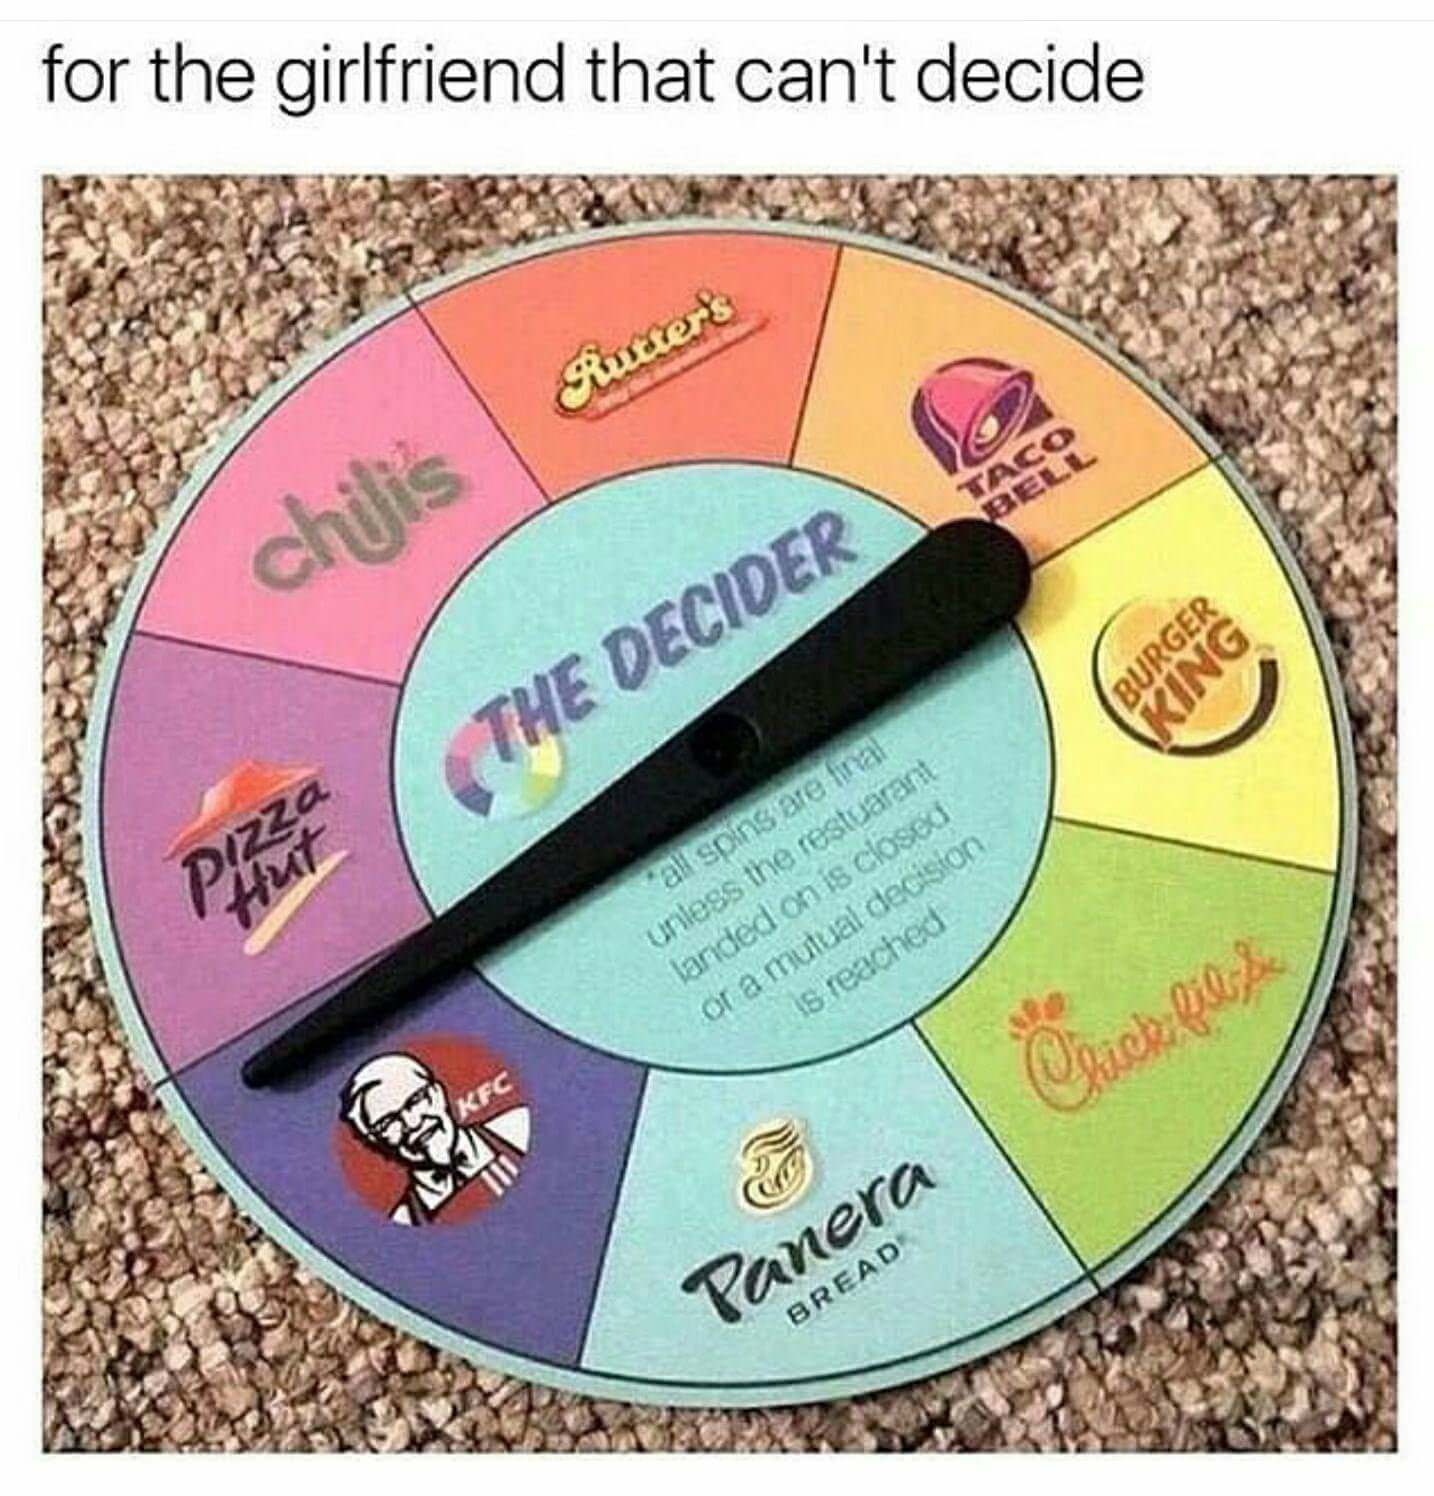 your girl can t decide - for the girlfriend that can't decide Rutters chilis Burger Ing The Decider al spins are linal unless the restorant landed on is closed or a mutual decision is reached Chick fille Panera Bread